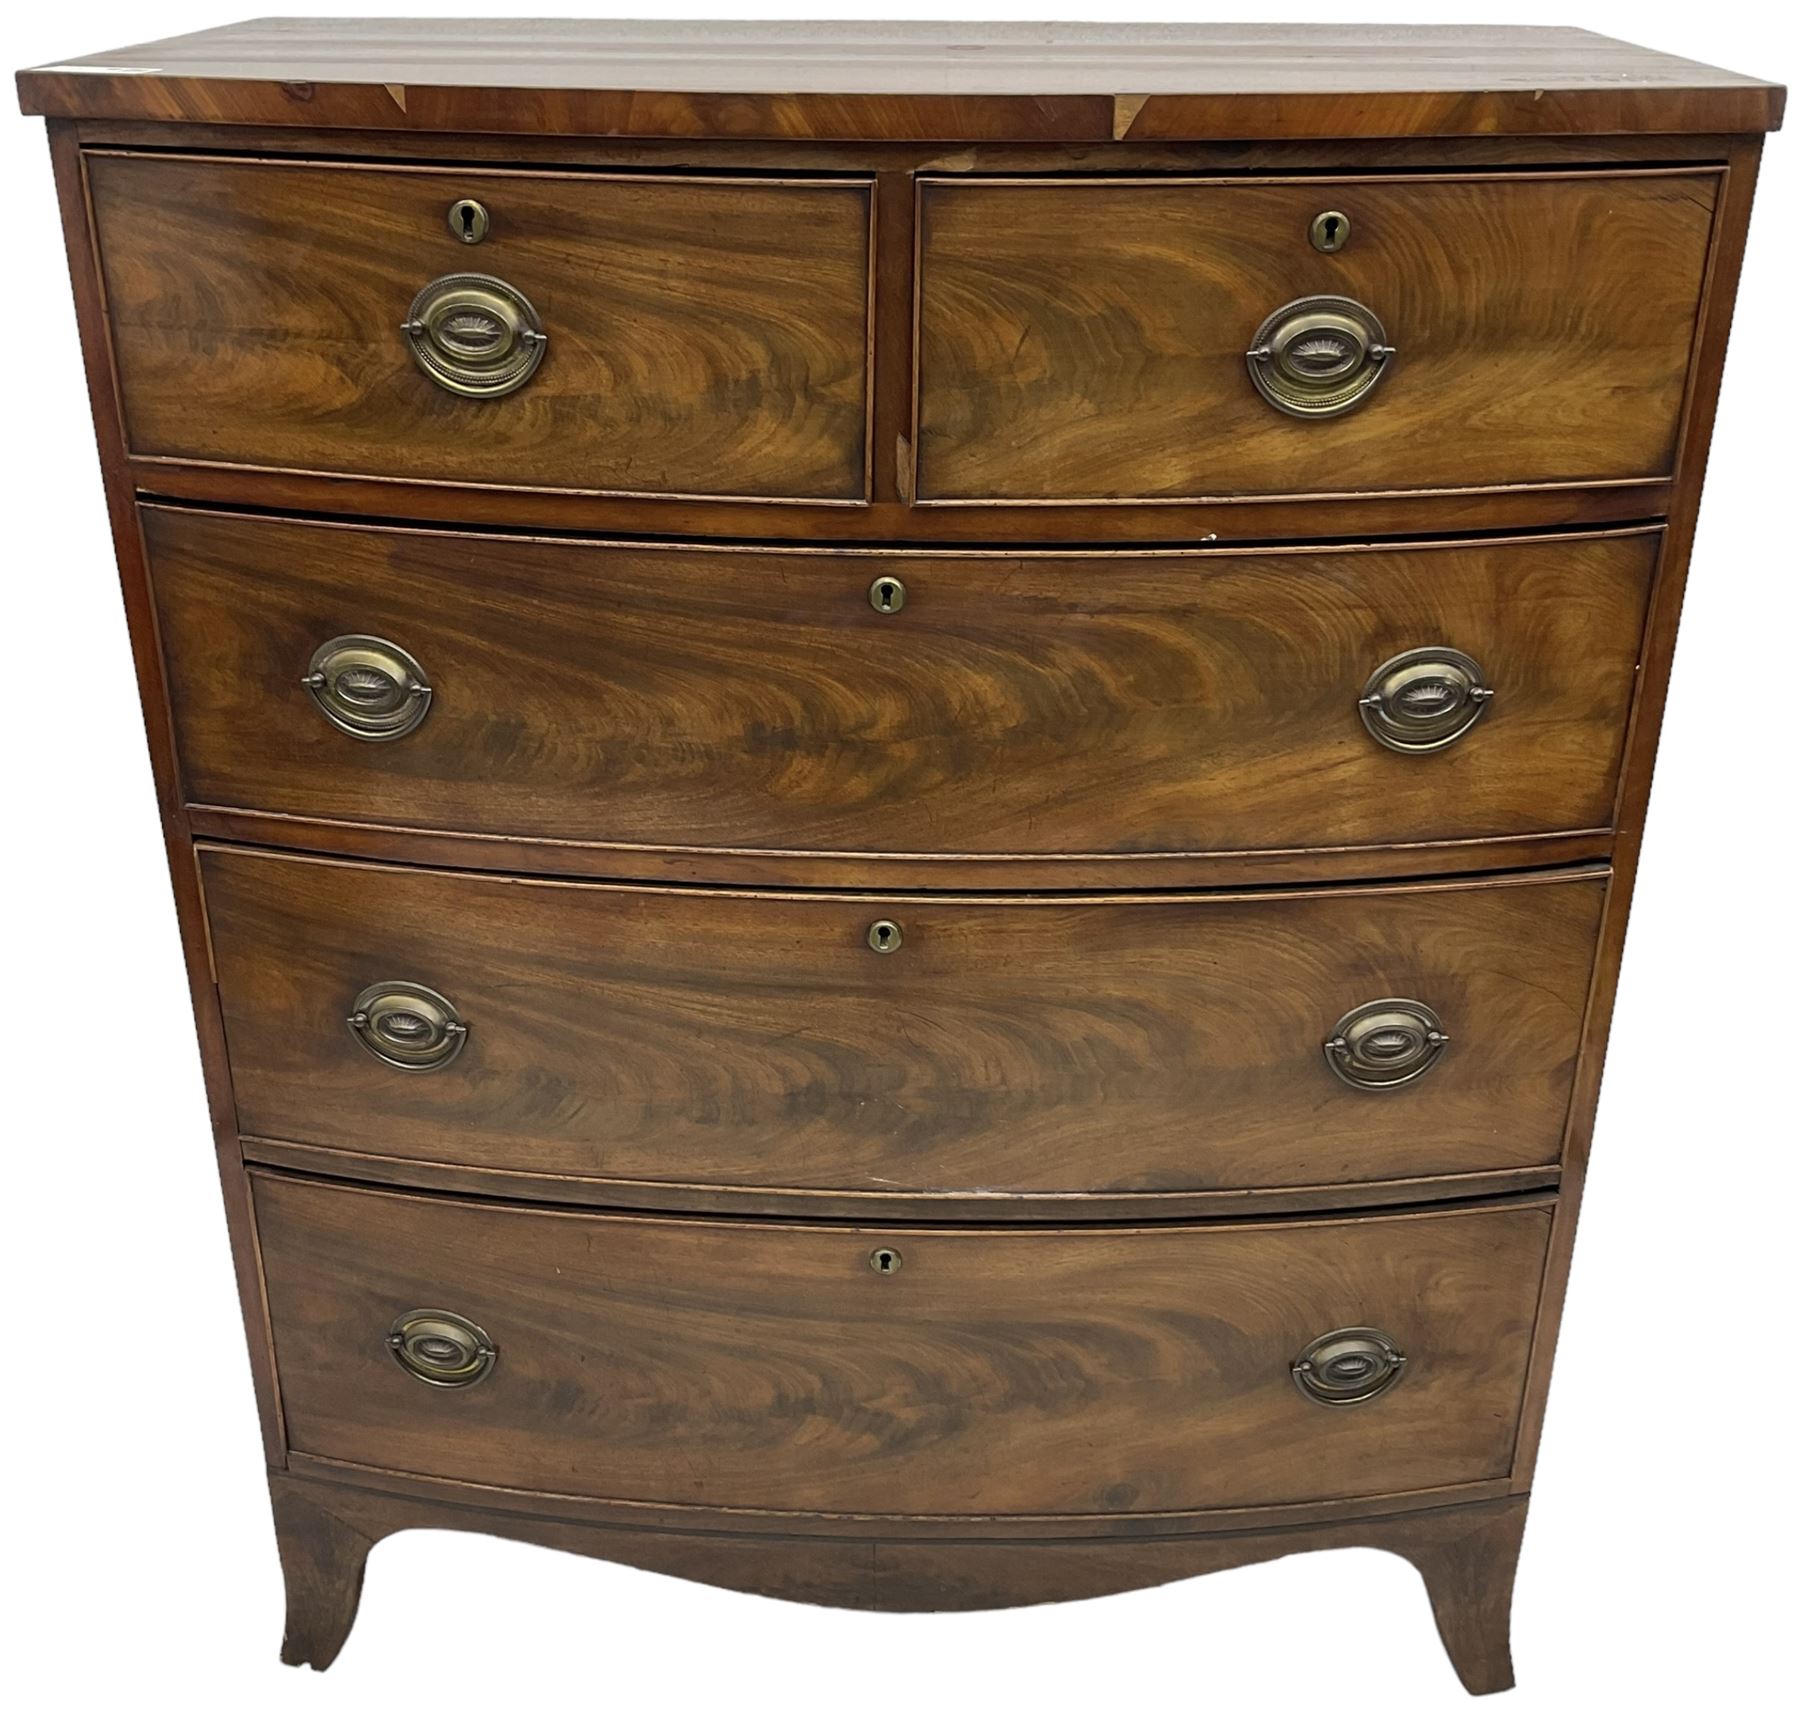 Victorian mahogany bow-front chest - Image 2 of 8